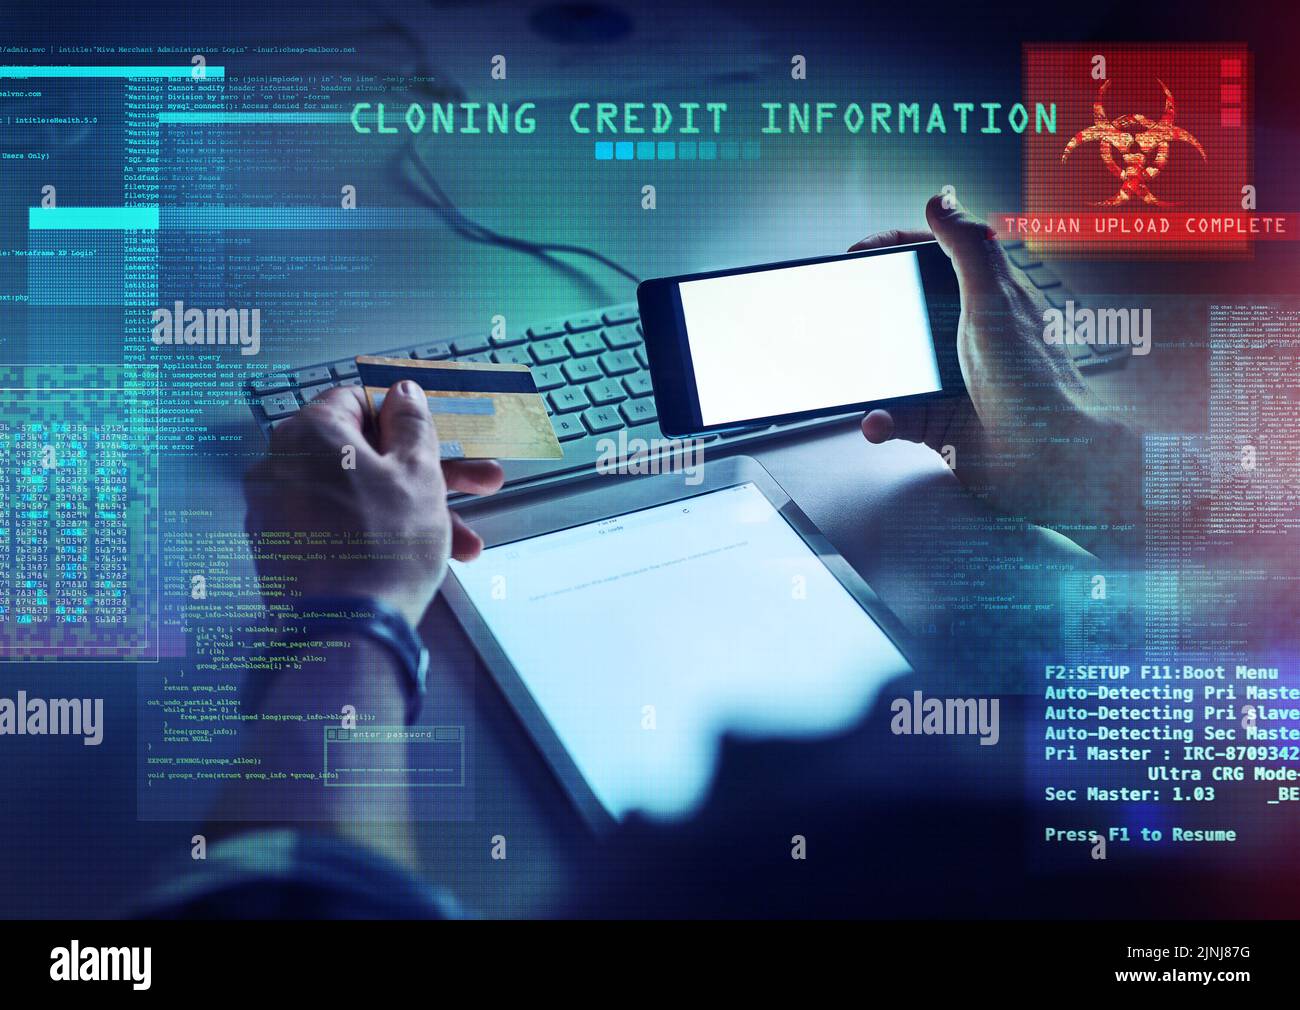 Cyber security, hacking and credit card fraud with cgi, special effects and digital overlay of the hands of a man cloning a bank account and stealing Stock Photo